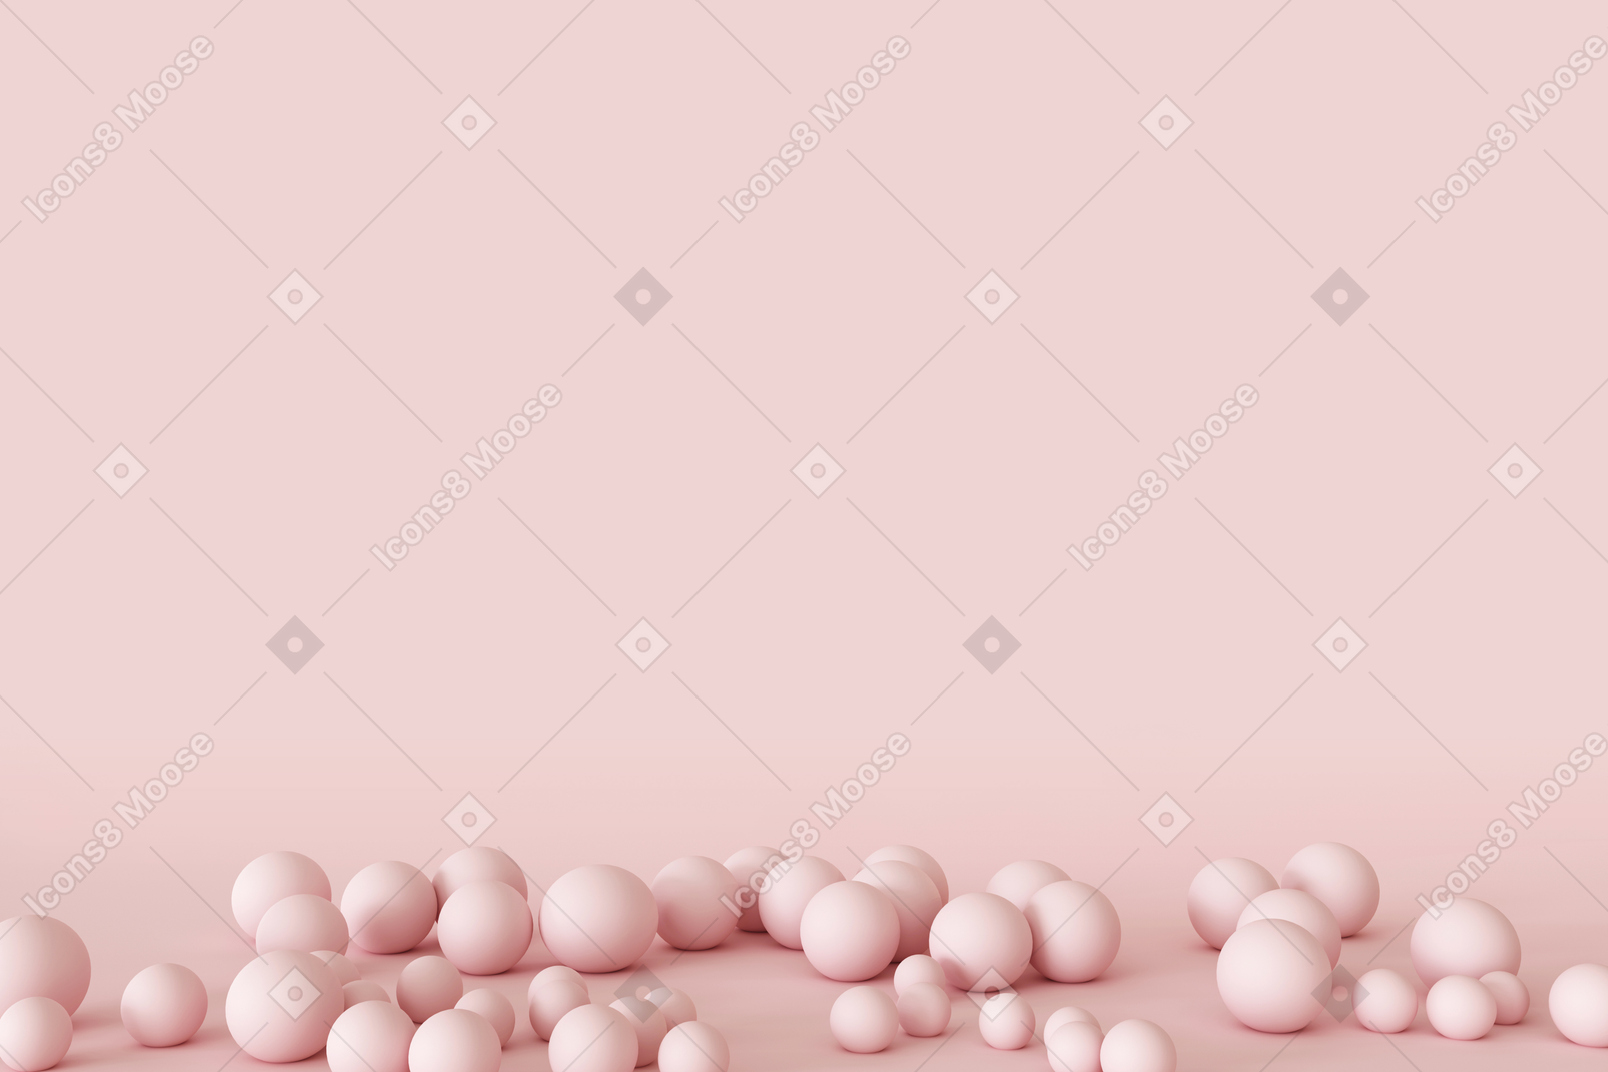 Pink background with small ballls